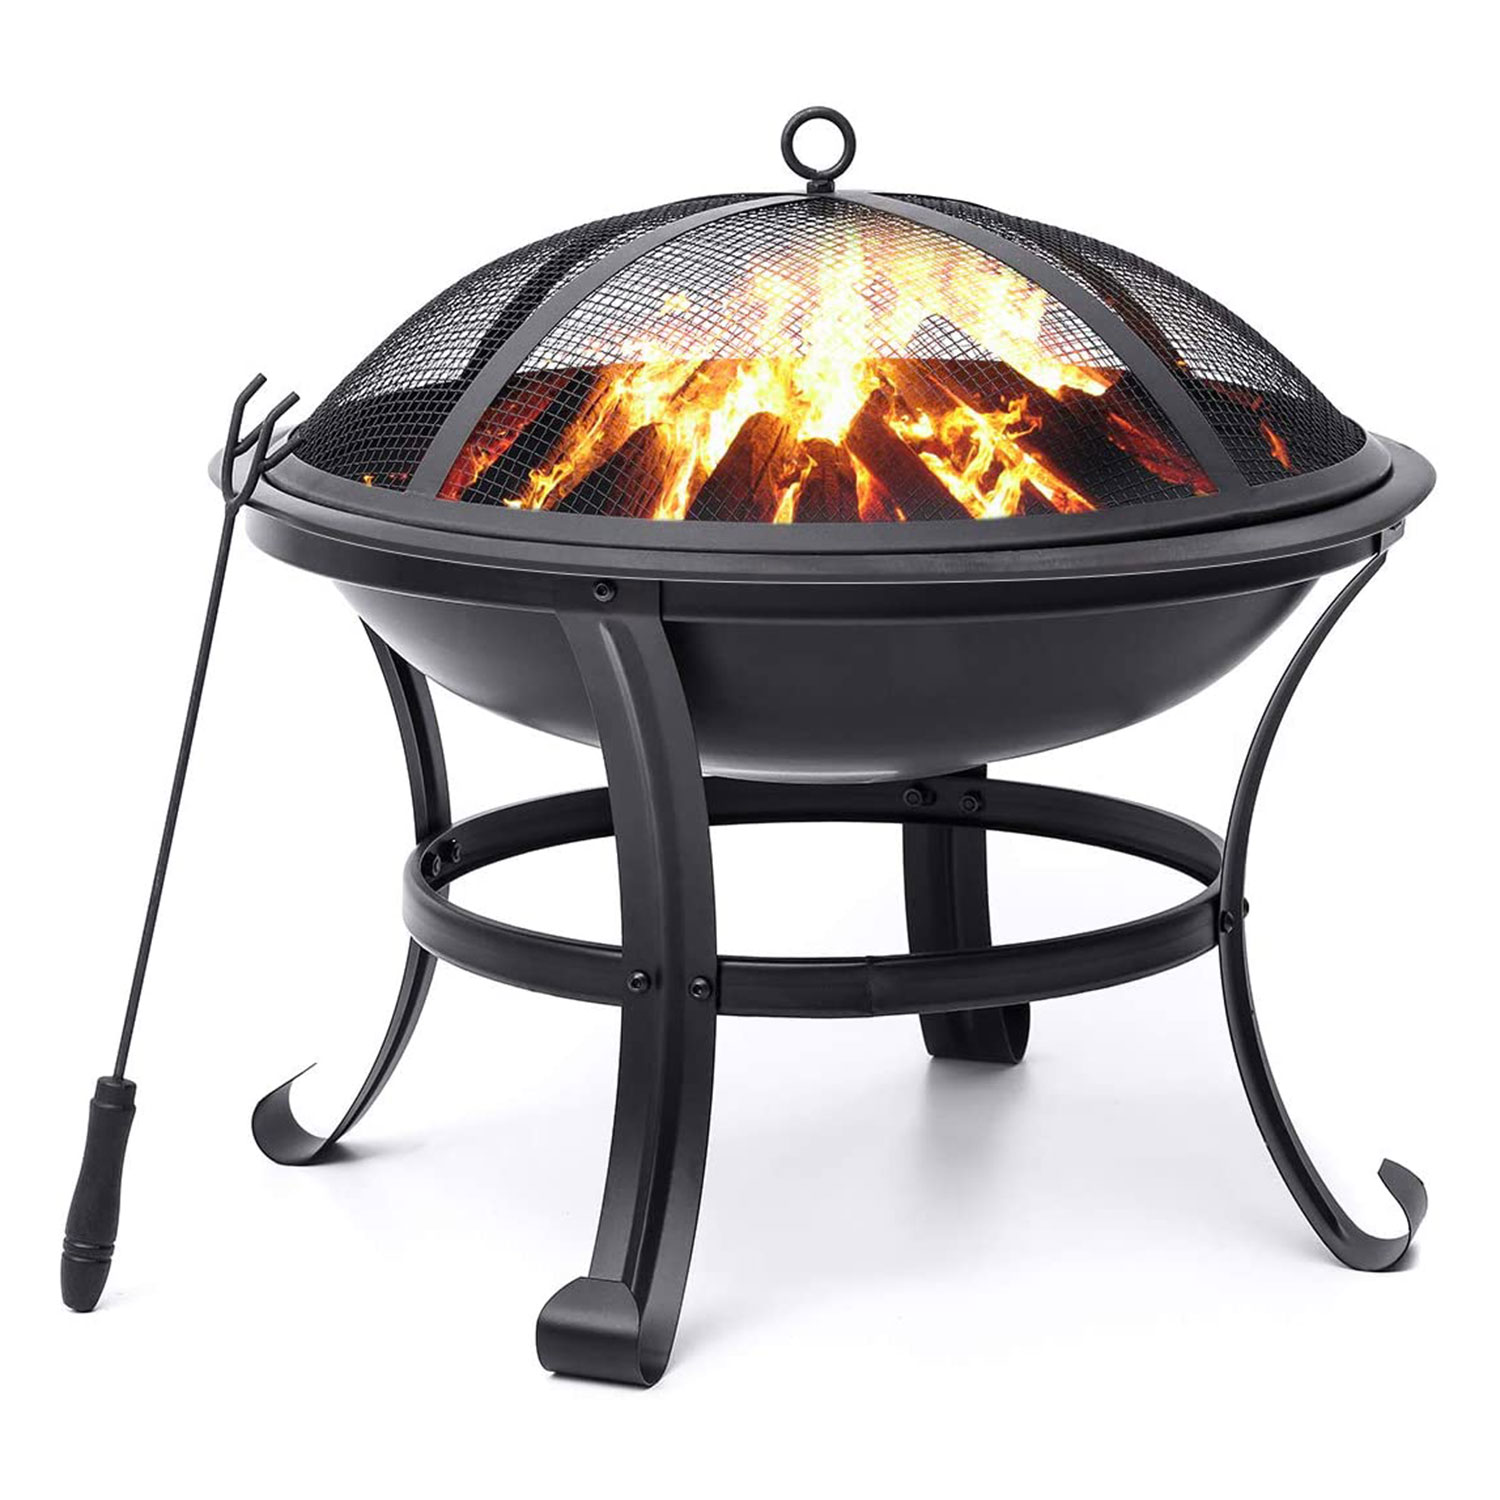 KINGSO Fire Pit, 22'' Fire Pits Outdoor Wood Burning Steel BBQ Grill